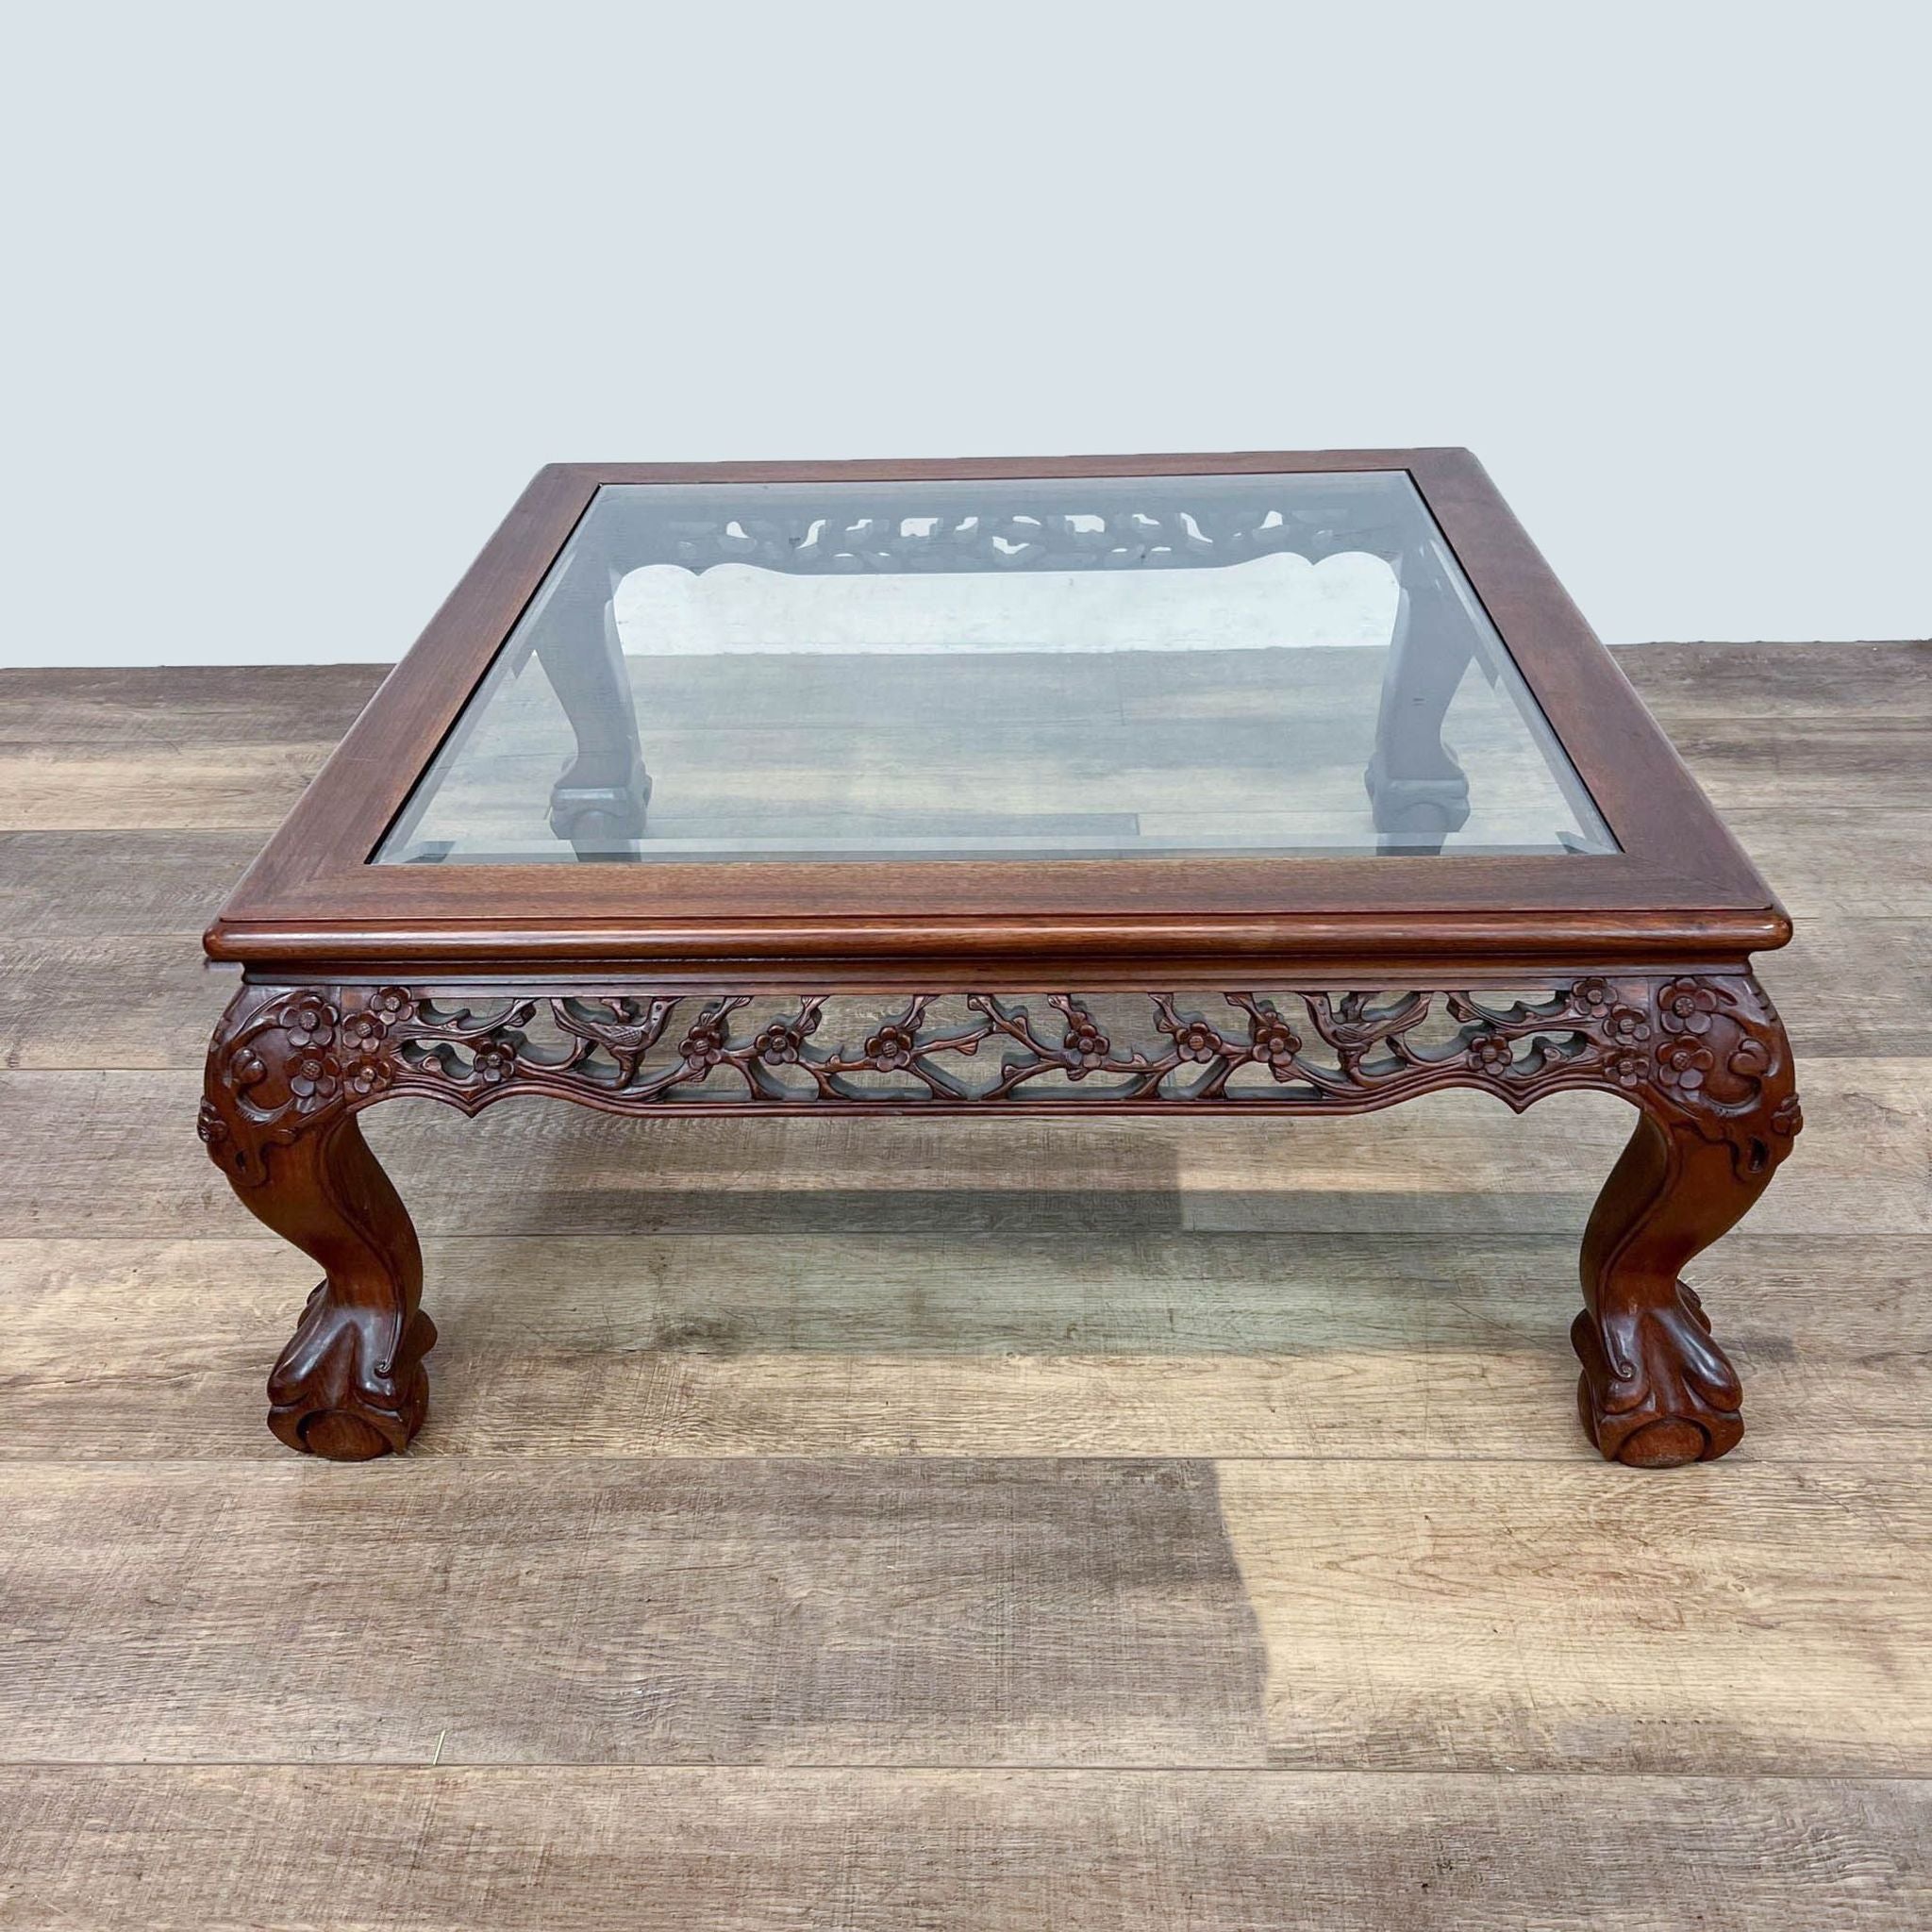 Elegant Reperch Chinese Chippendale coffee table with intricate woodwork and ball and claw feet, glass inset.